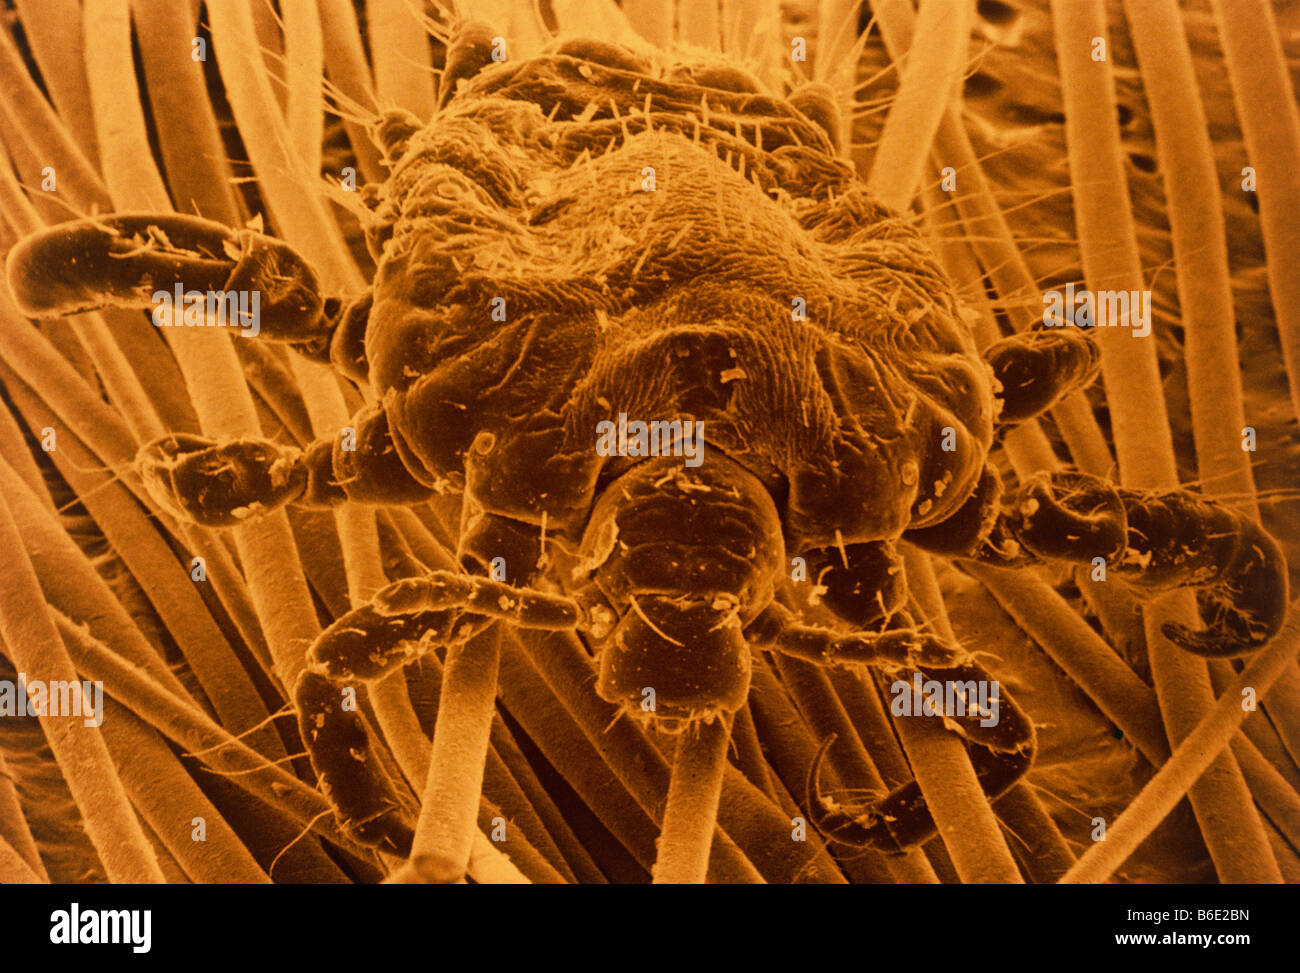 Pubic louse, Coloured scanning electron micrograph (SEM) of pubic louse Stock Photo